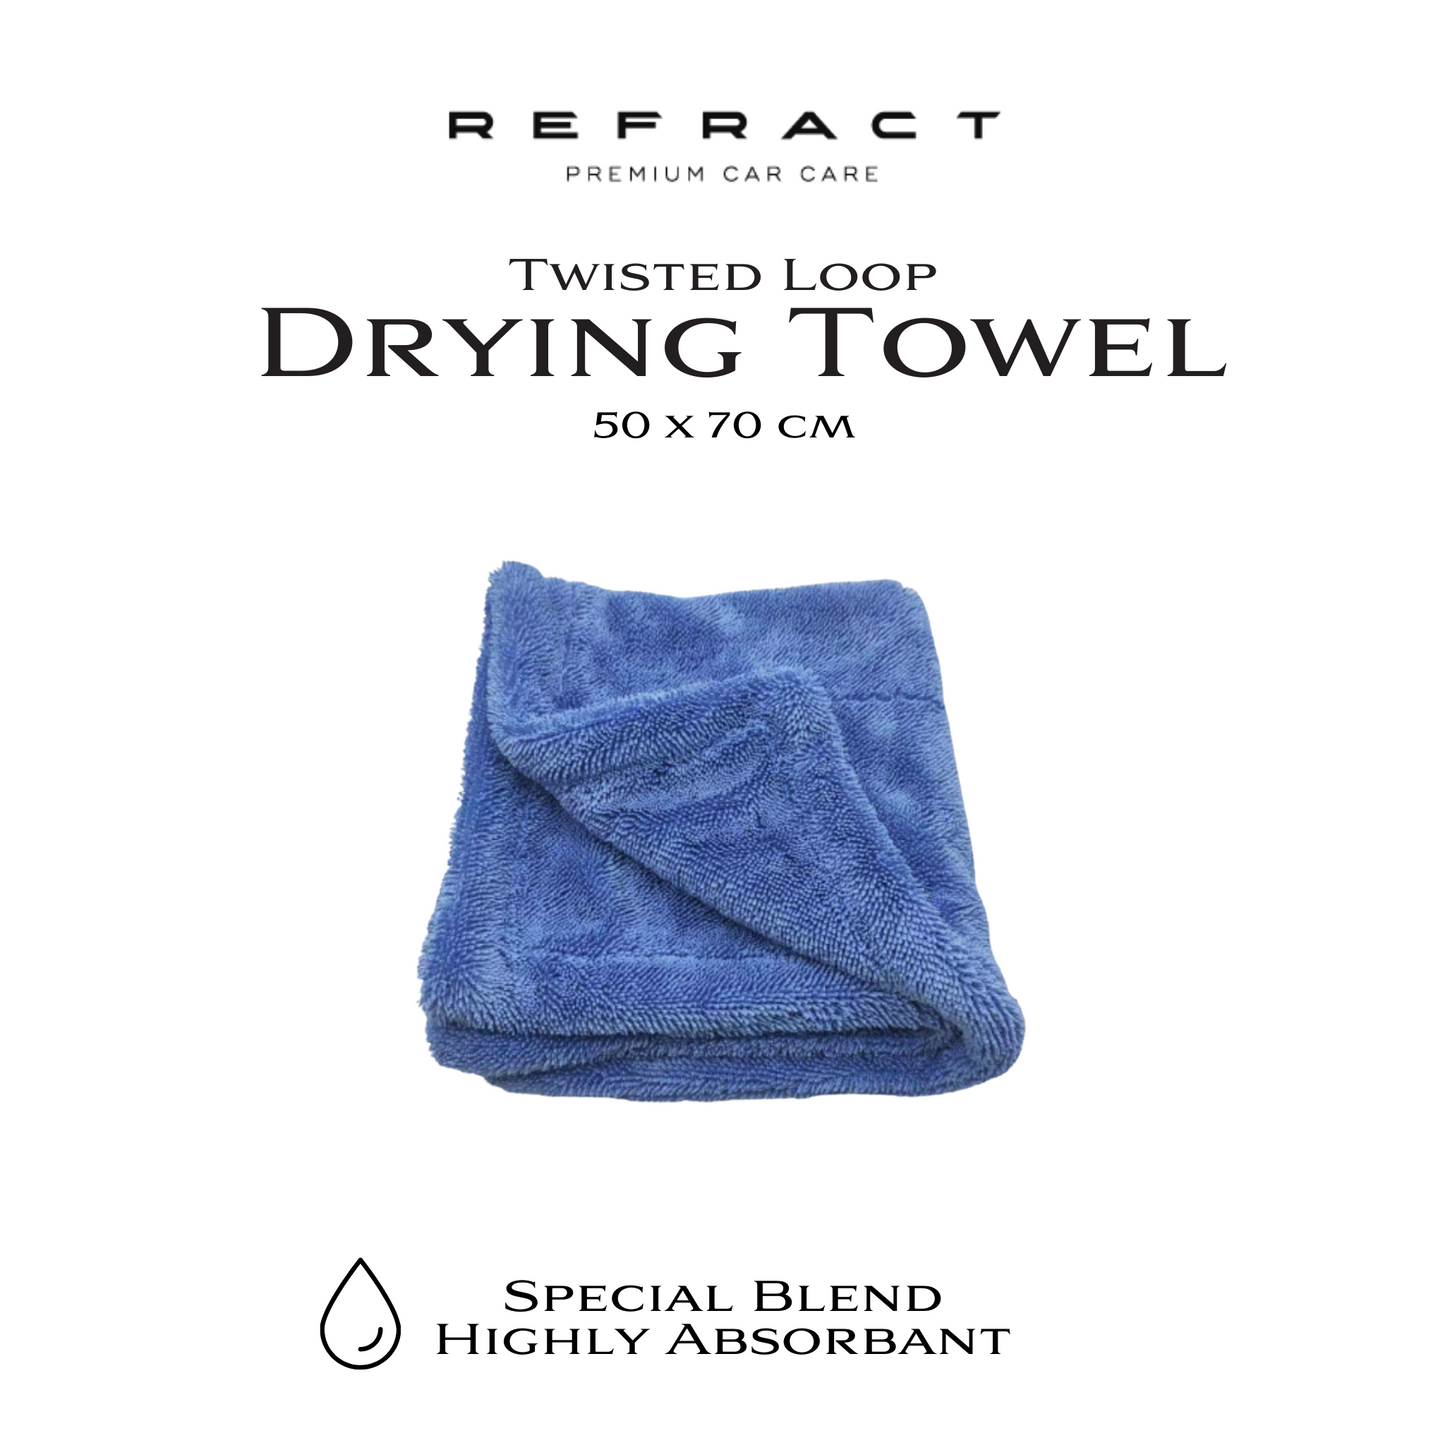 REFRACT Pro Dry - Twisted Loop Rapid Drying Towels